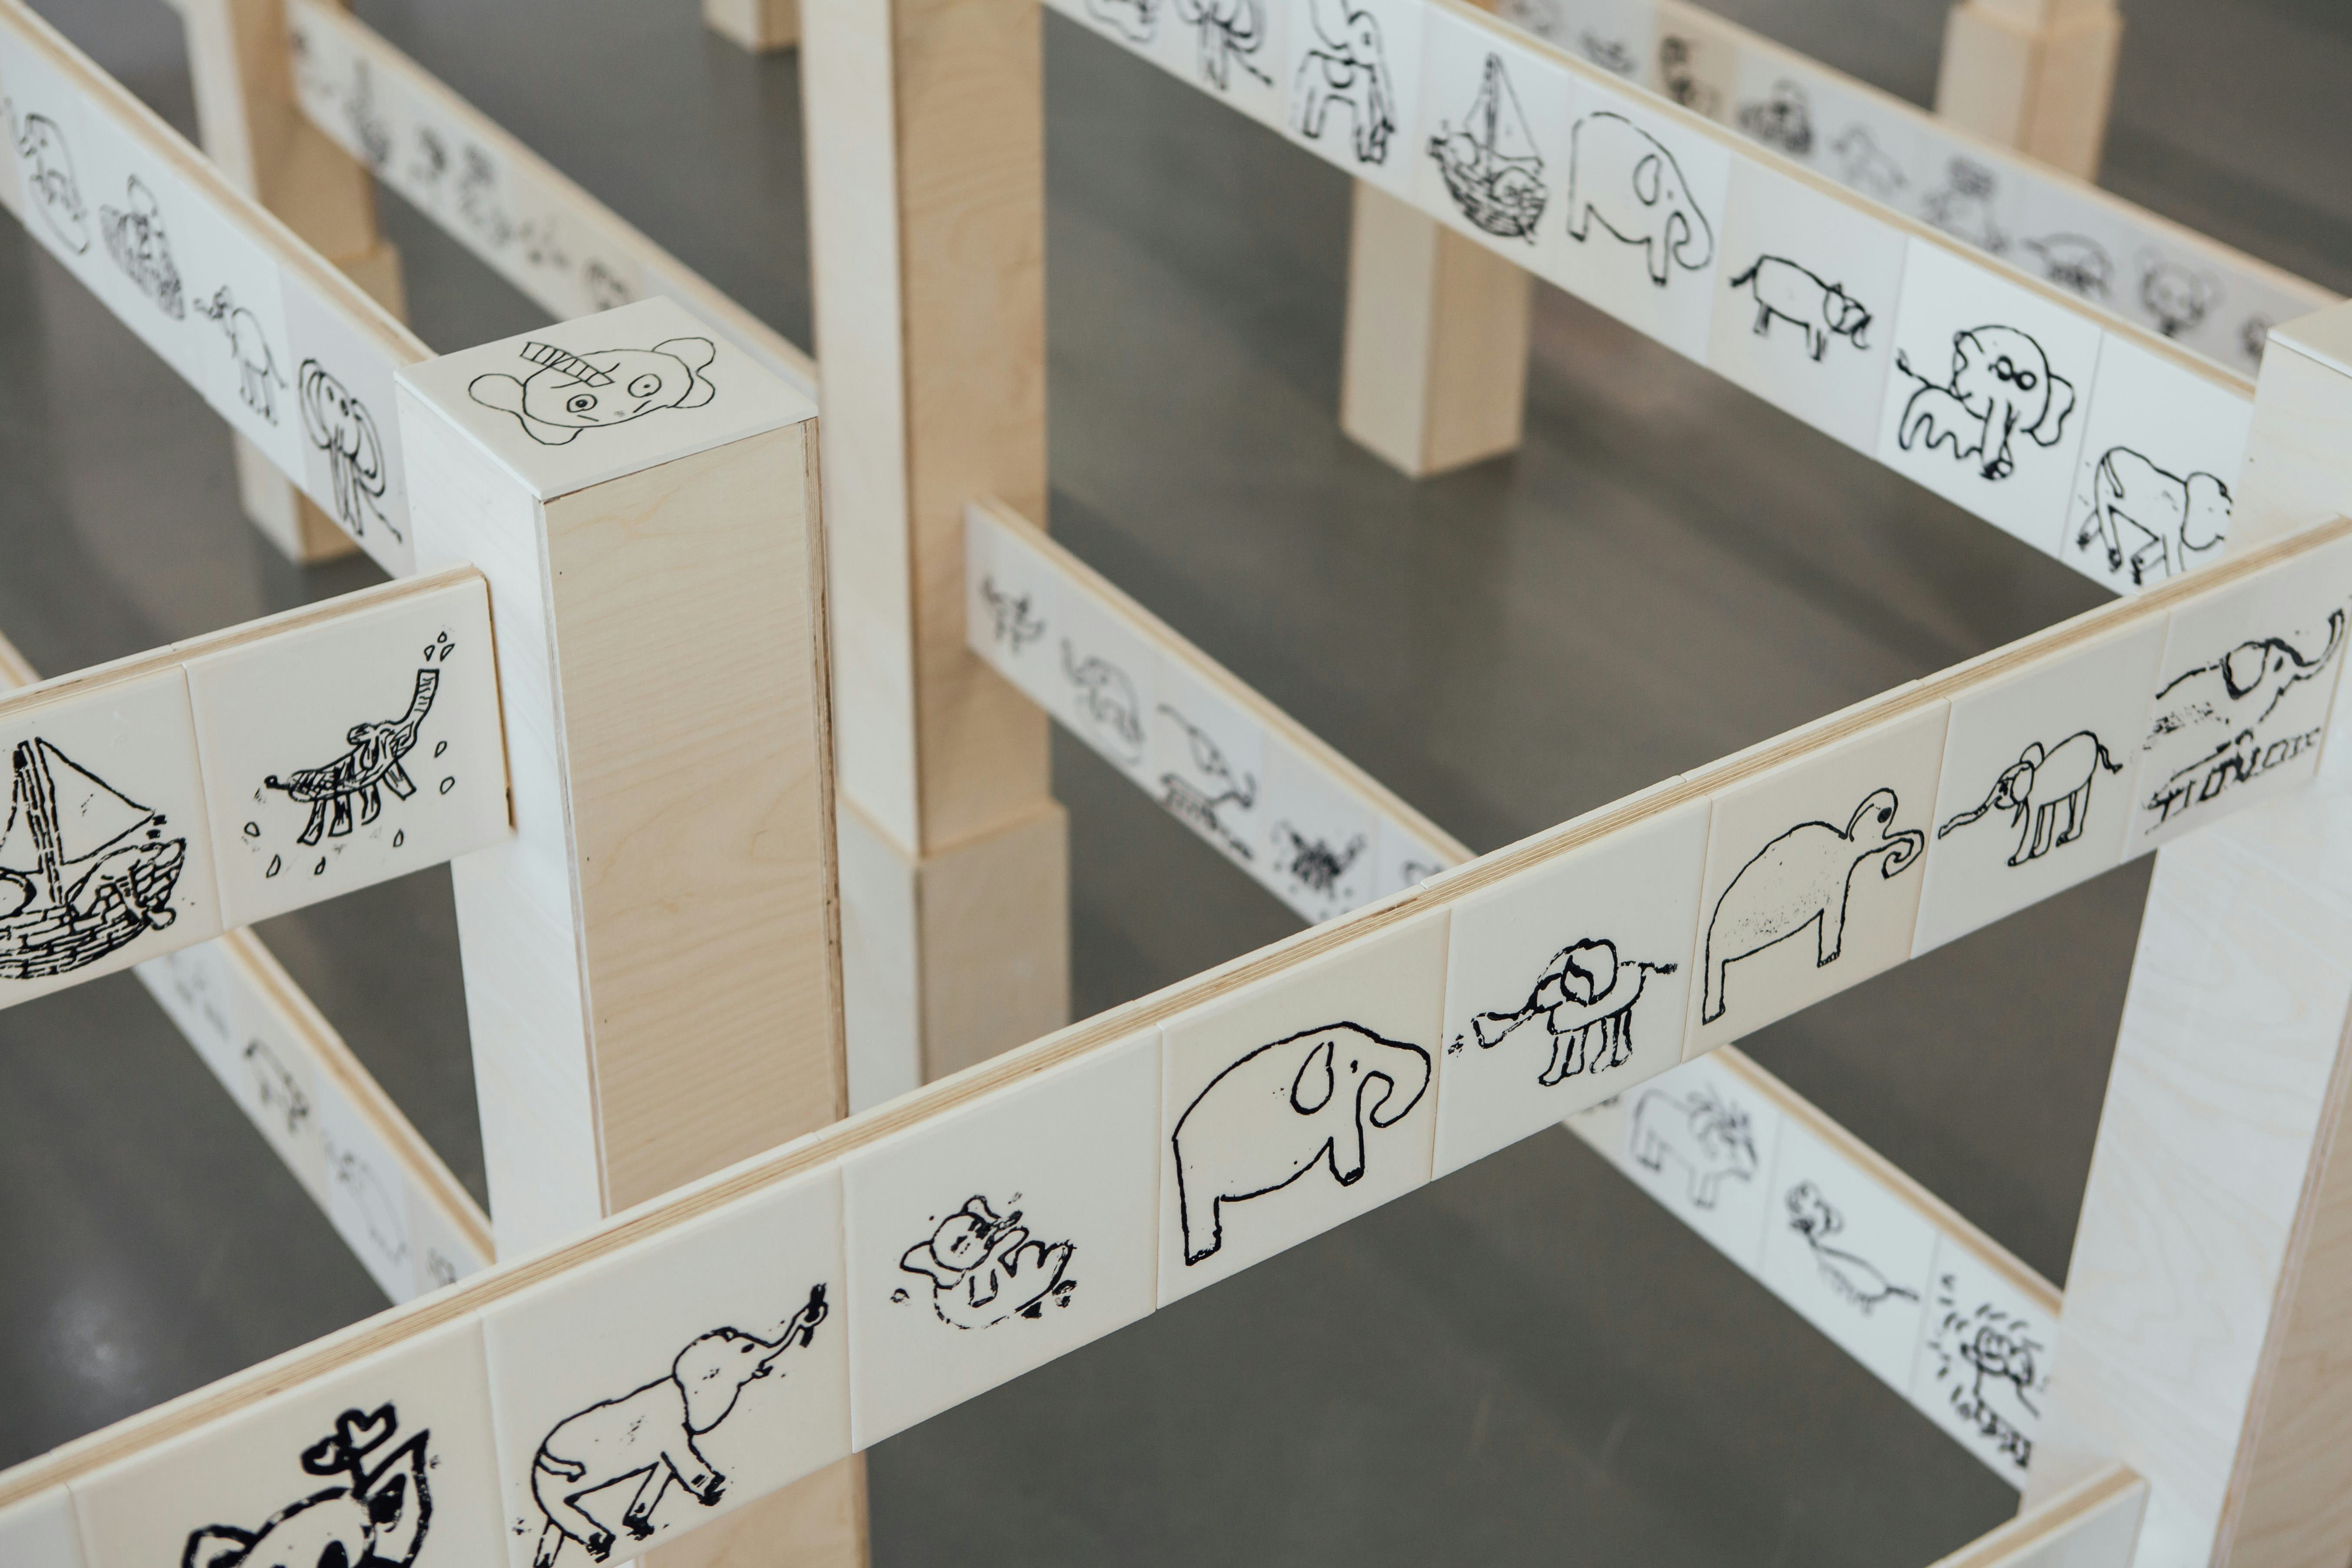 A detail of an art installation with ceramic tiles covered in childrens’ drawings of an elephant